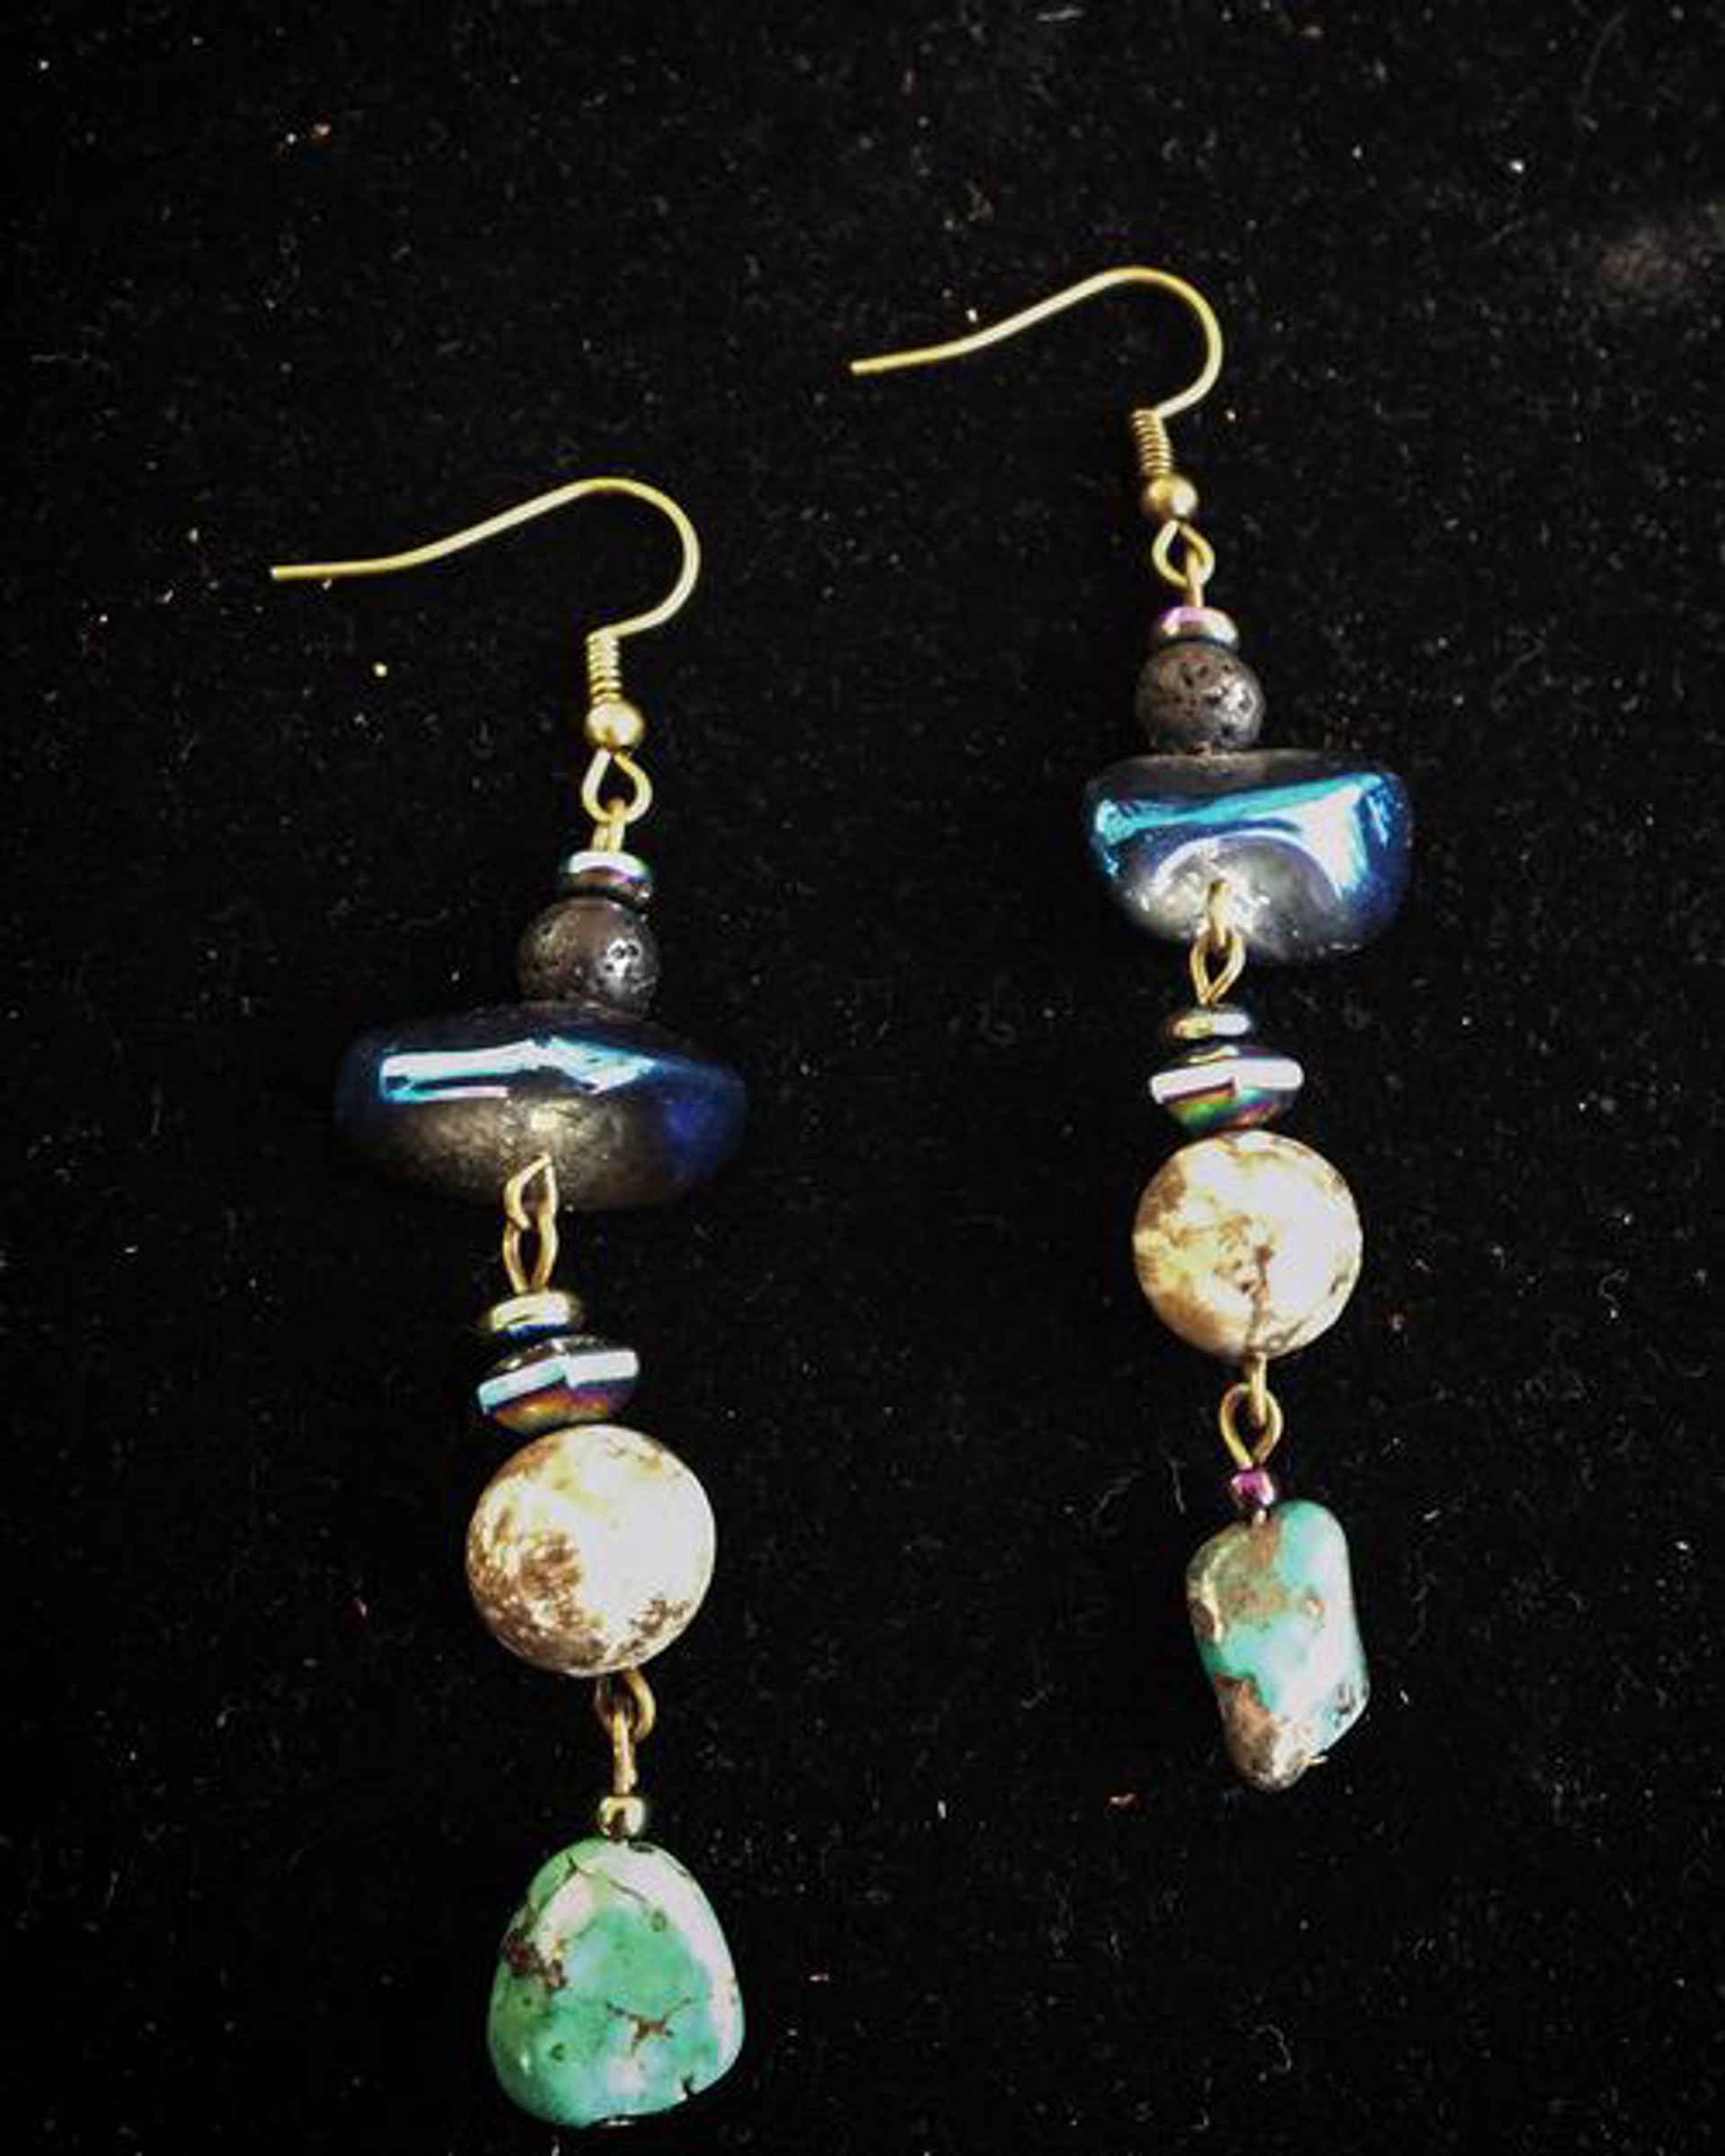 K251 Triple Drop Turquoise and Hematite Earrings by Kelly Ormsby